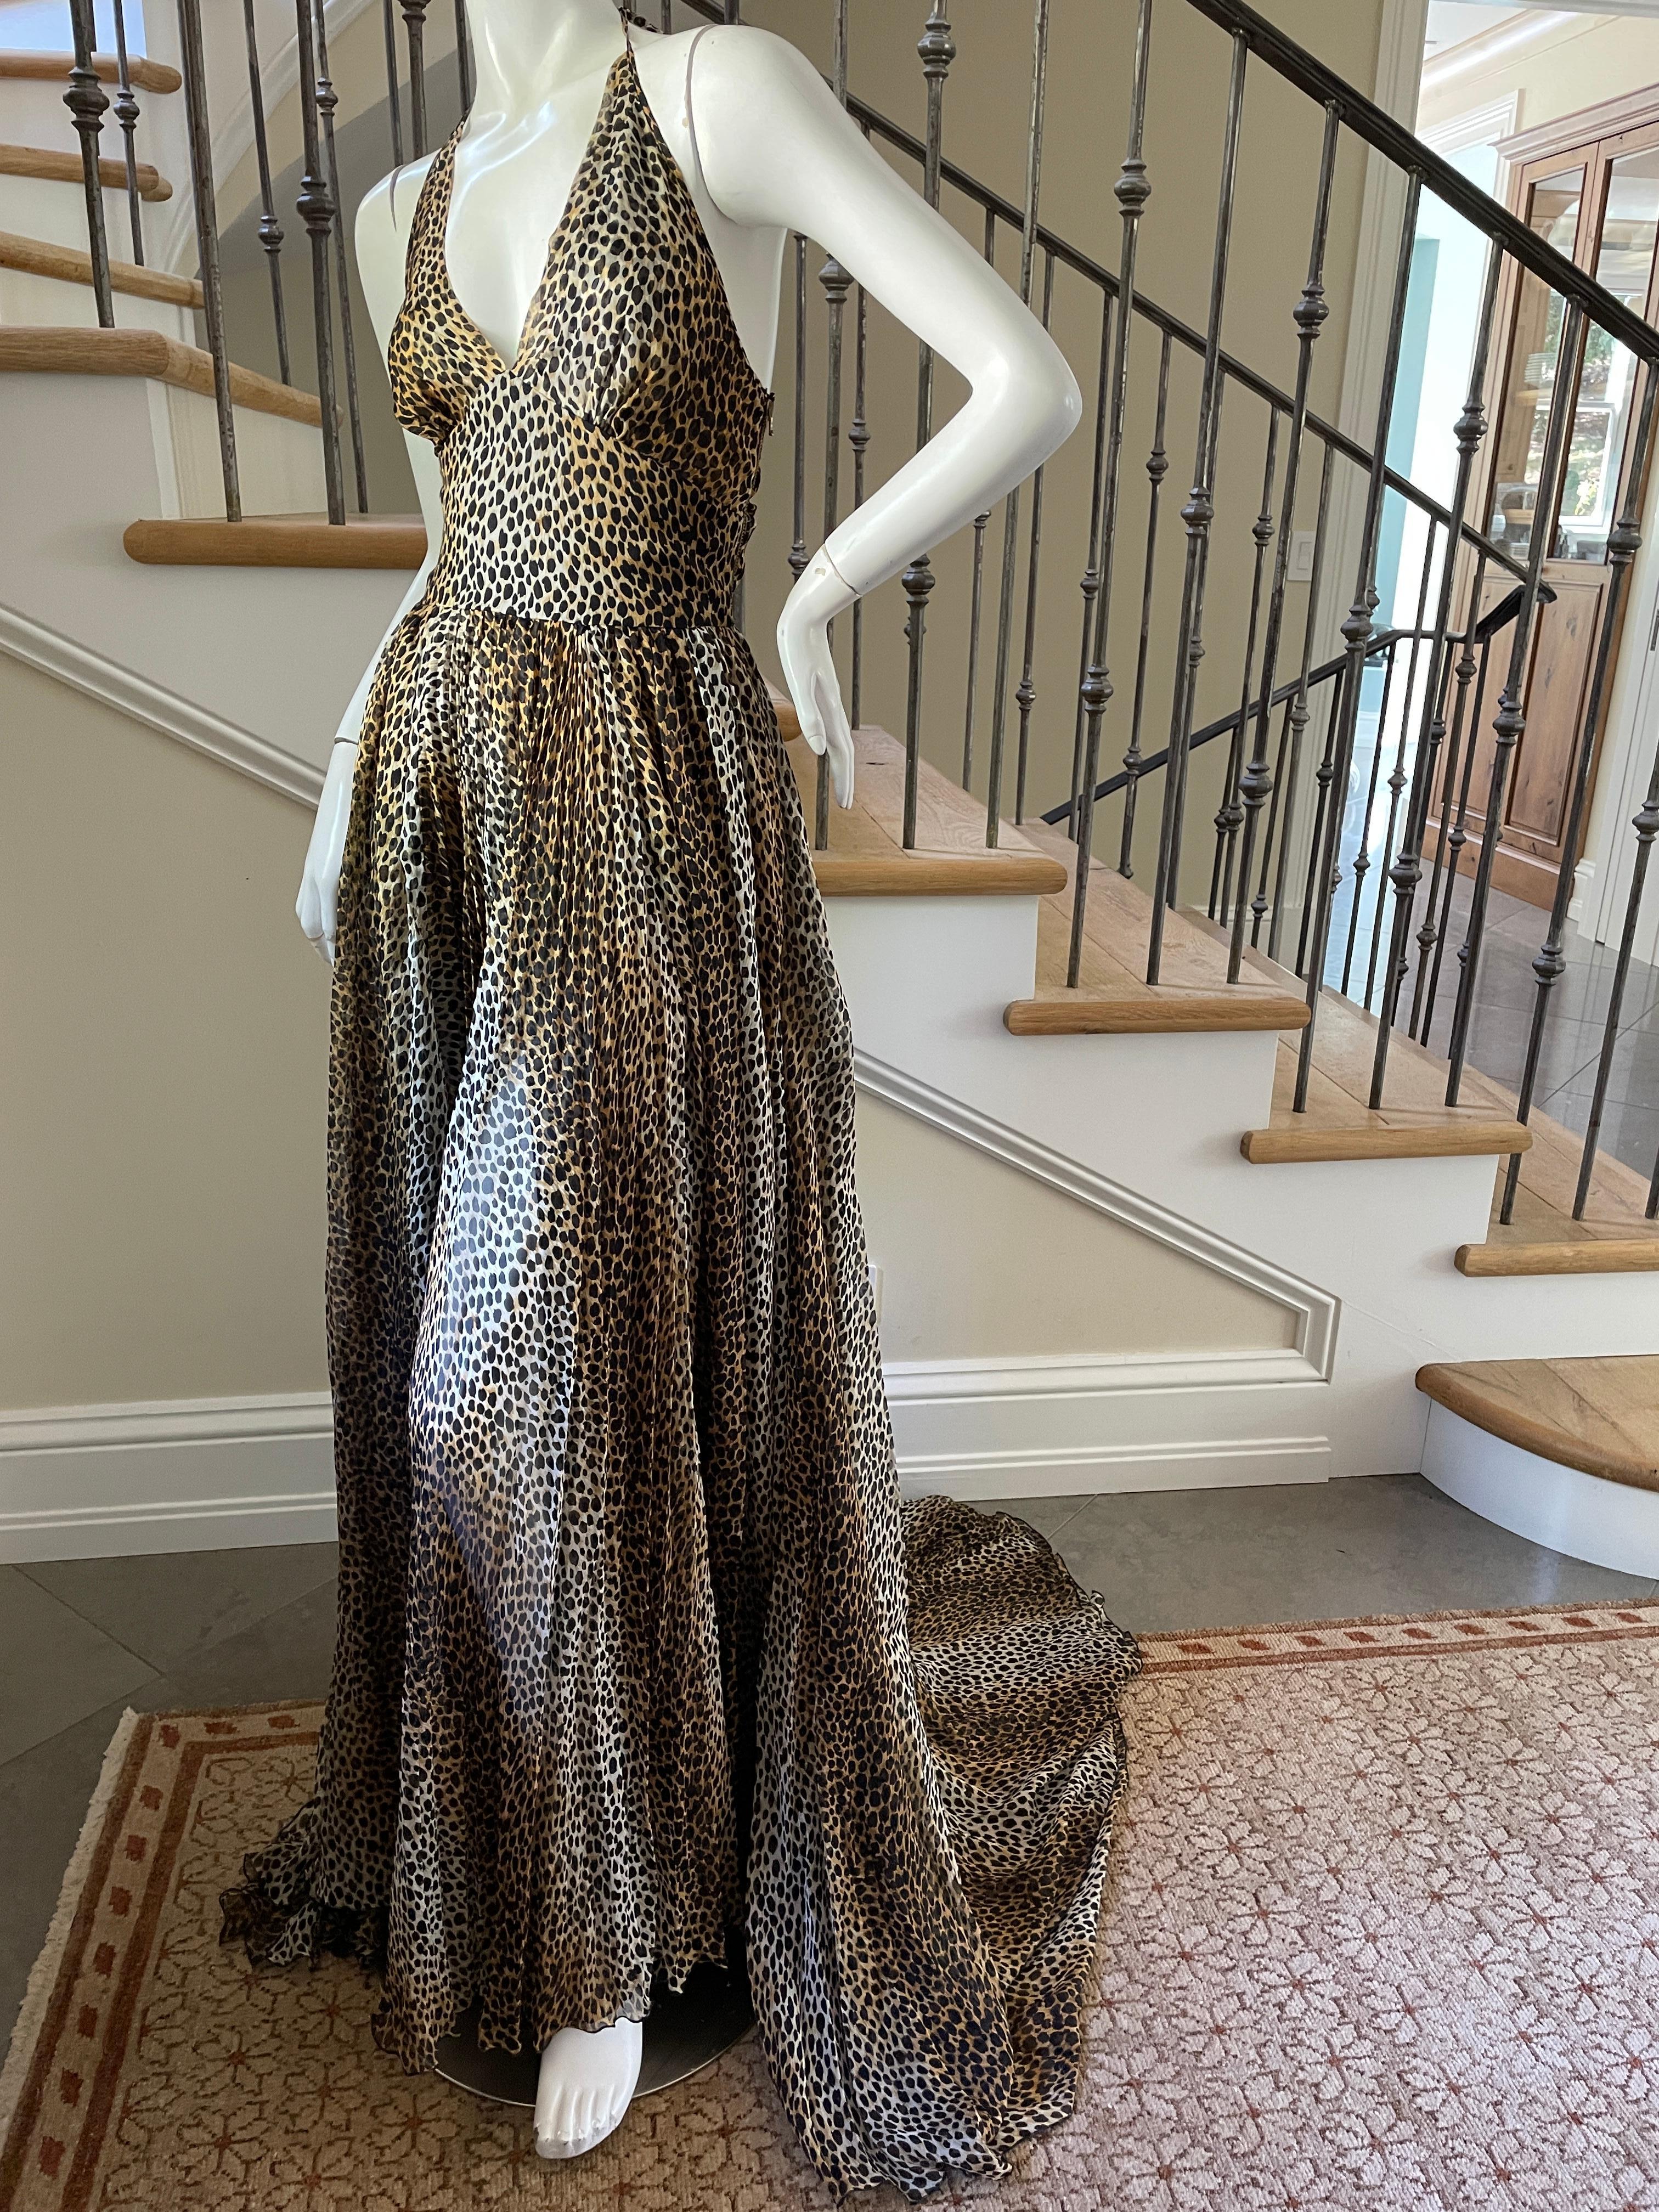 D&G by Dolce & Gabbana Vintage Leopard Silk Halter Style Evening Dress w Train In Excellent Condition For Sale In Cloverdale, CA